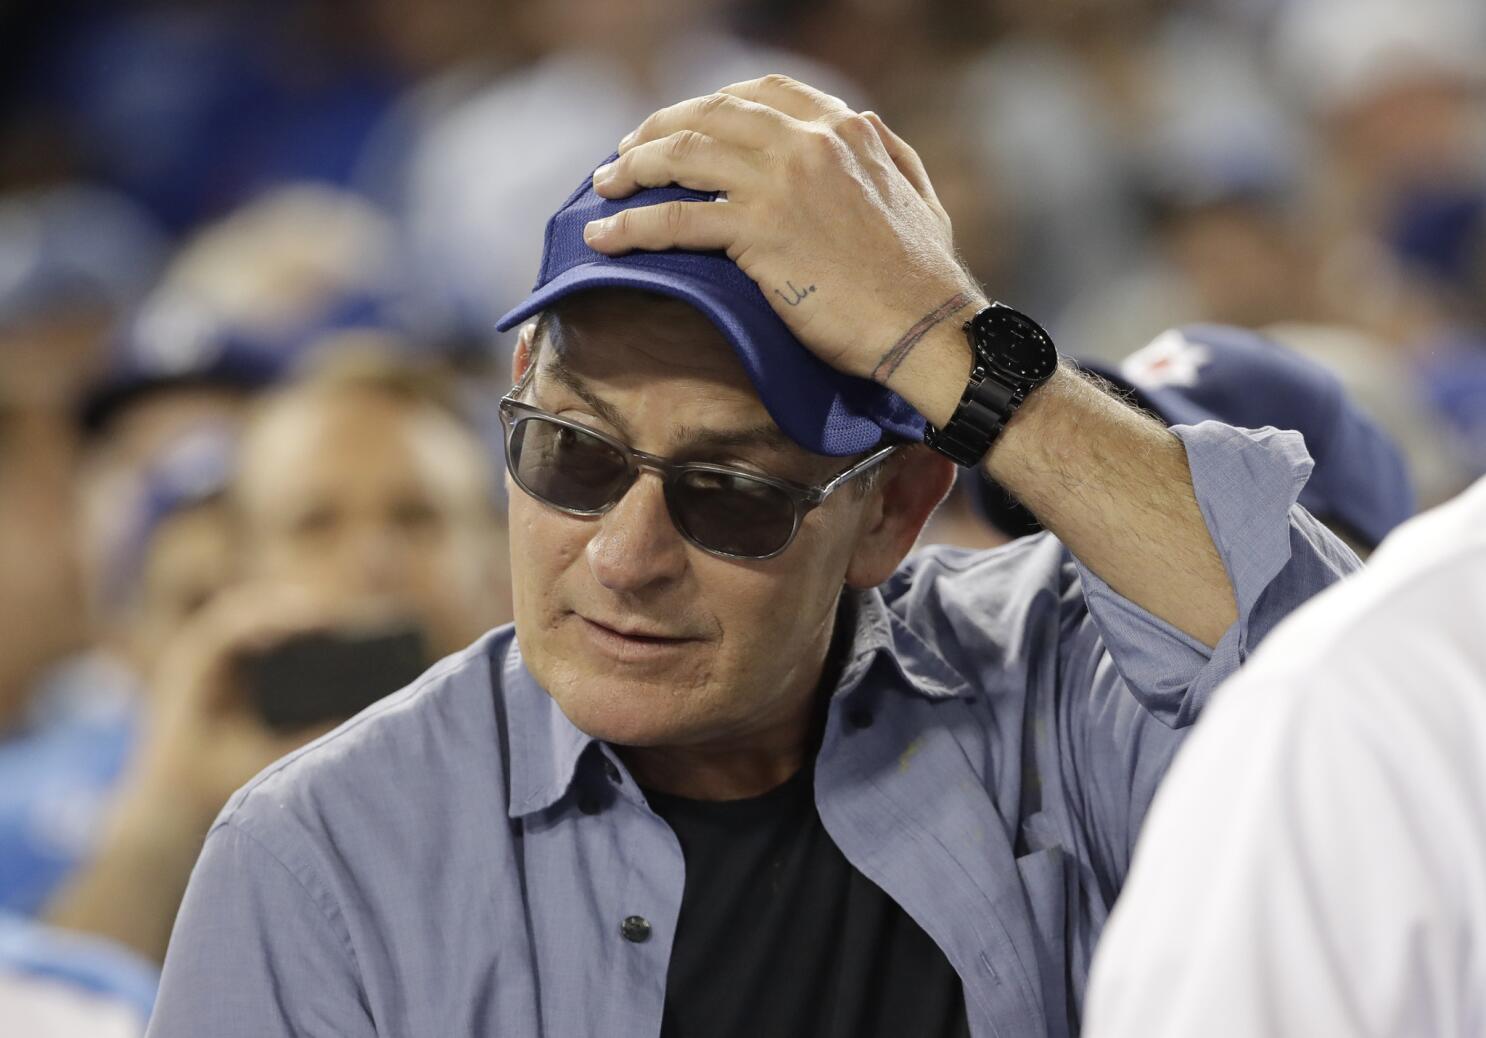 Indians won’t call on ‘Wild Thing’ Charlie Sheen to pitch